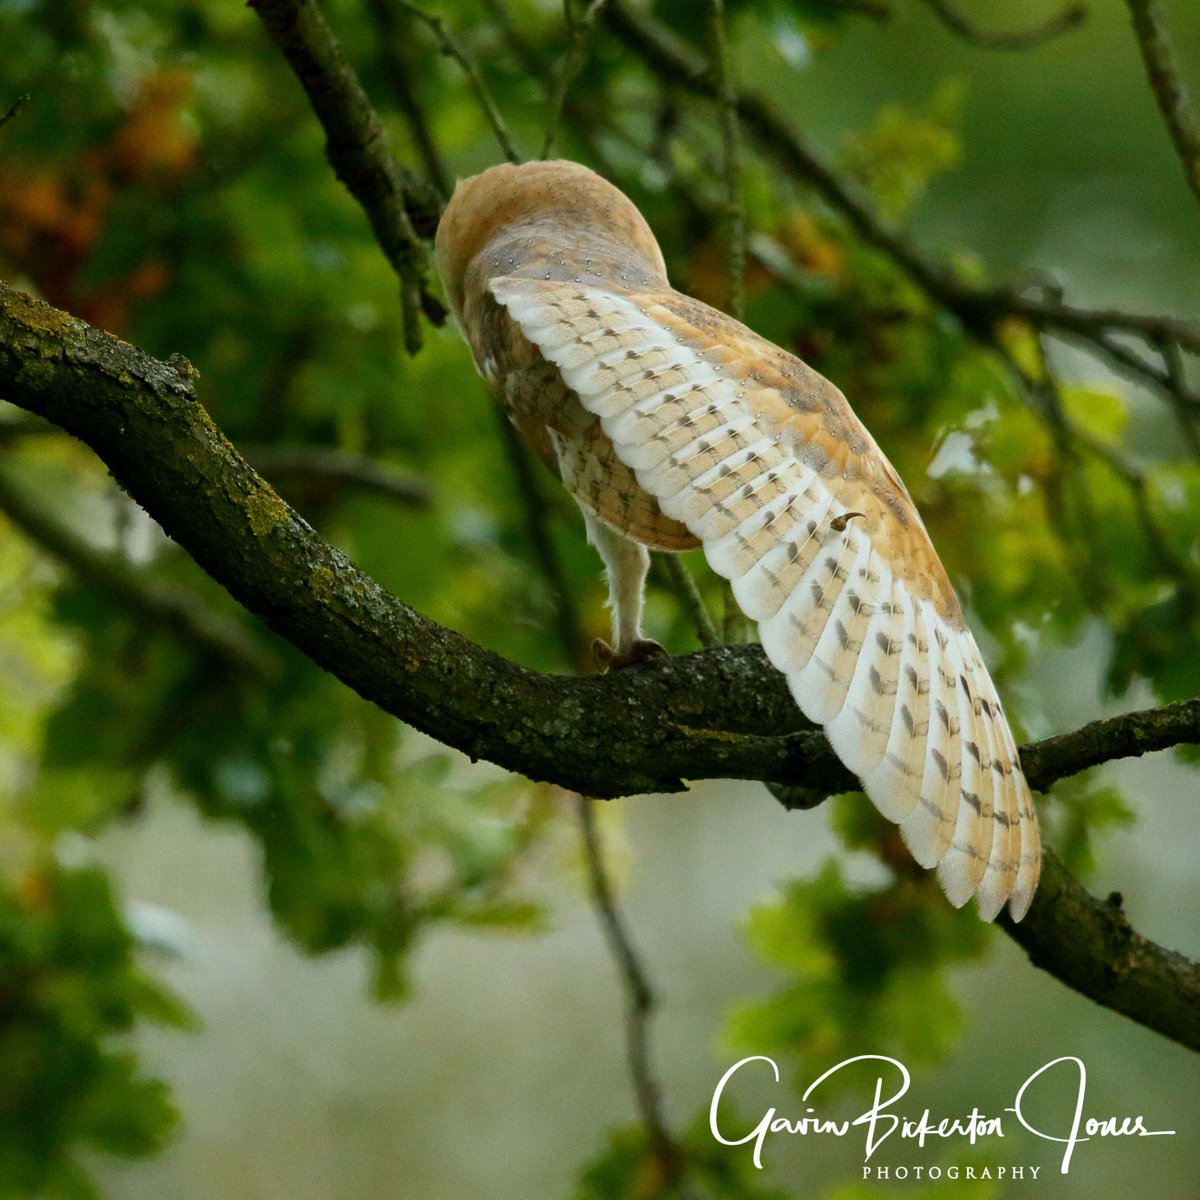 RT @bickertonjones: Sleepy Barn Owl wakes and stretches before night hunt, Check out the talon through the wing in pic 4! @Natures_Voice @BarnOwlTrust @GBPhotoAwards @Britnatureguide @bestofwildlife @wildlife_uk @BBCEarth #barnOwl #Norfolk @wildlife_birds